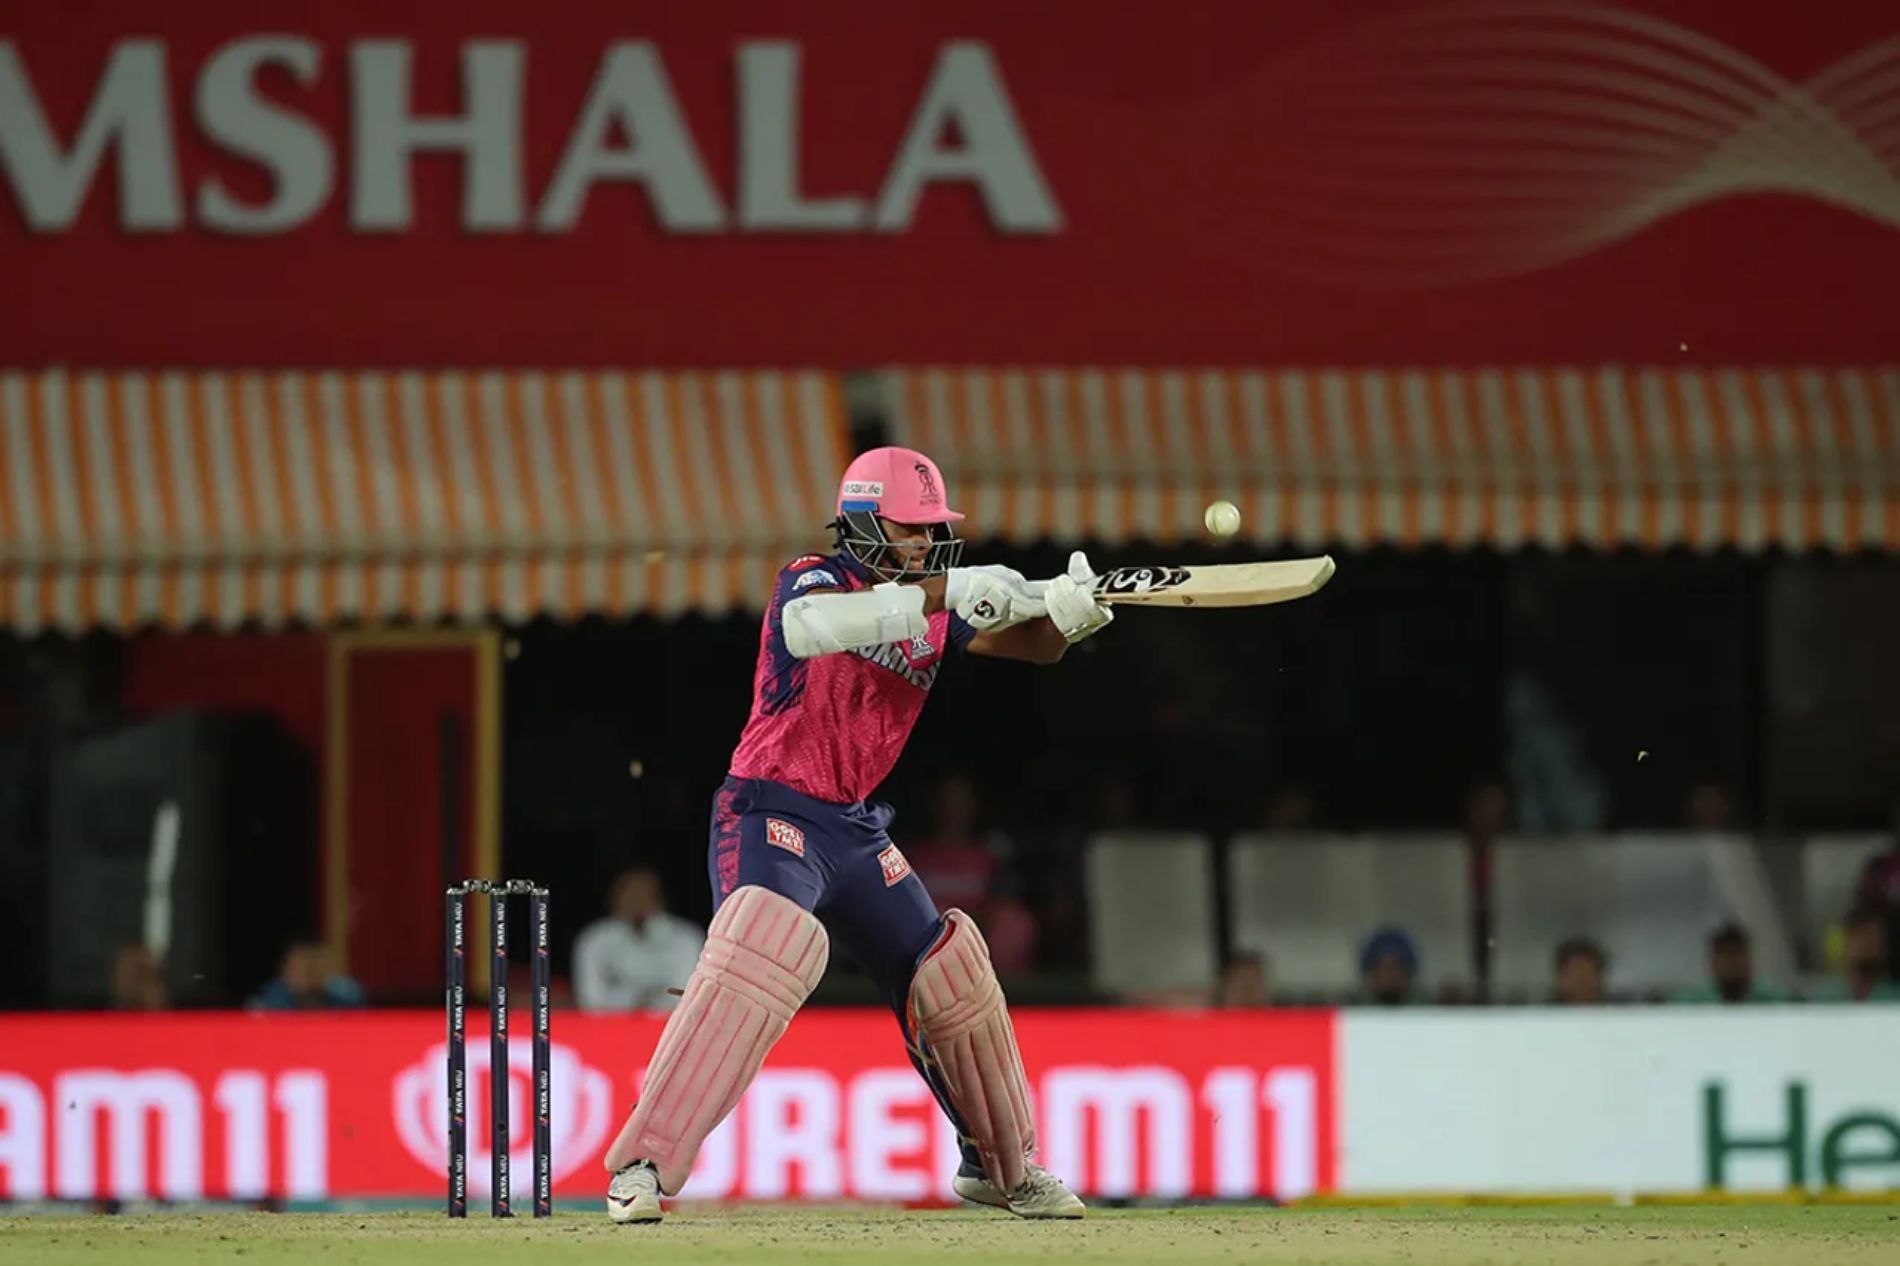 Yashasvi Jaiswal has been in supreme form with the bat. (Pic: iplt20.com)